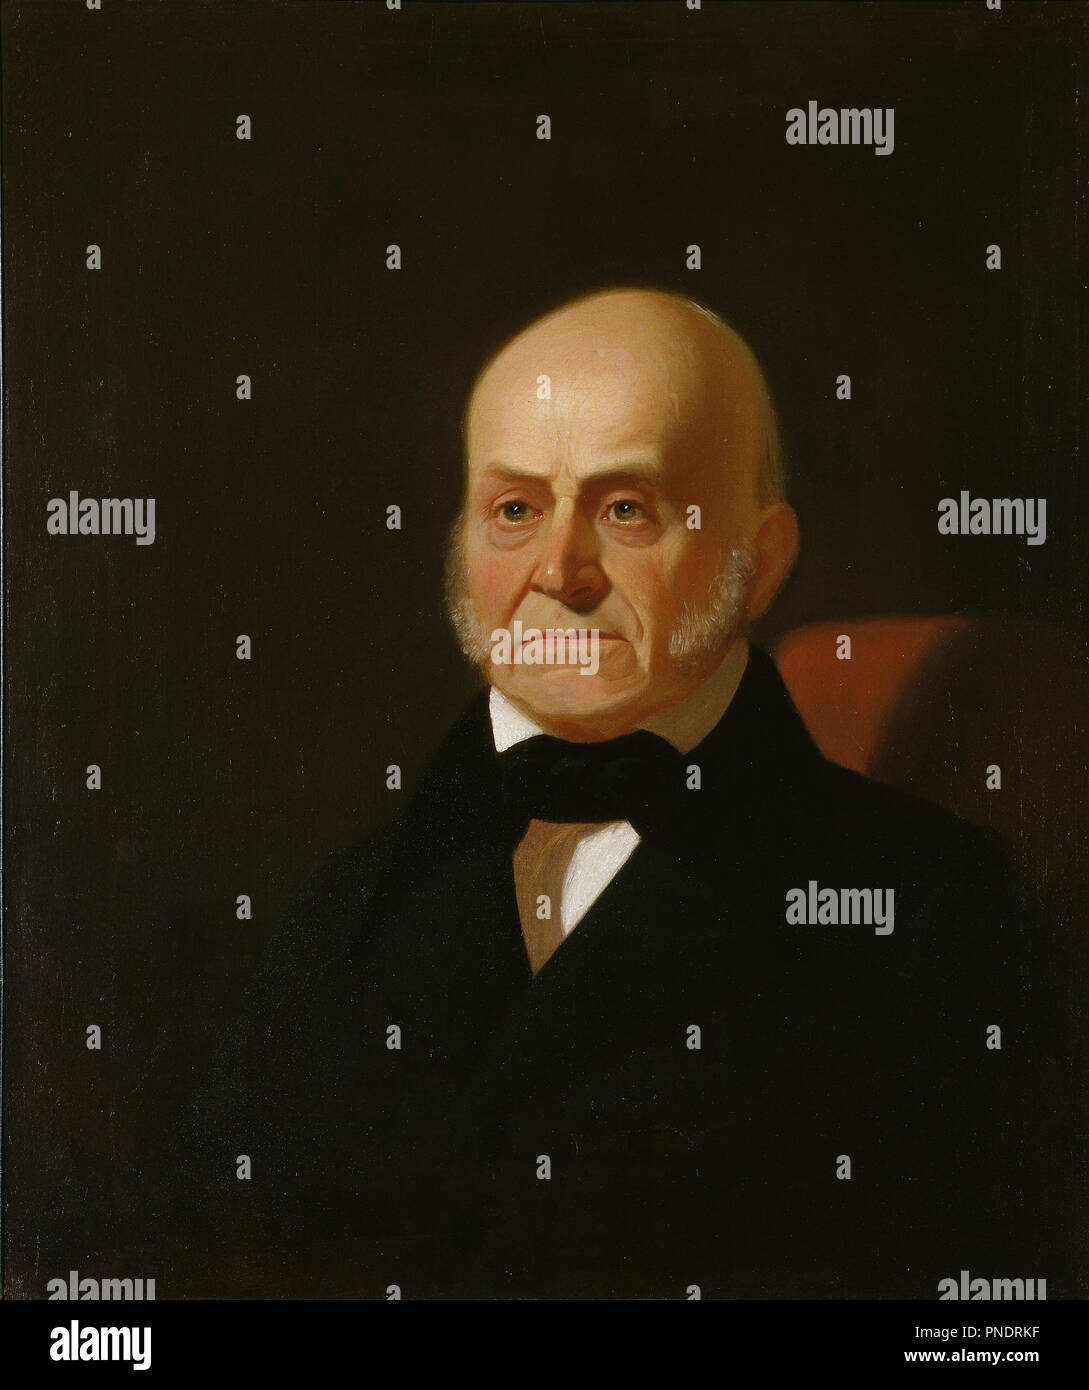 John Quincy Adams. Date/Period: Ca. 1850, from an 1844 original. Painting. Oil on canvas. Height: 759 mm (29.88 in); Width: 638 mm (25.11 in). Author: George Caleb Bingham. Stock Photo